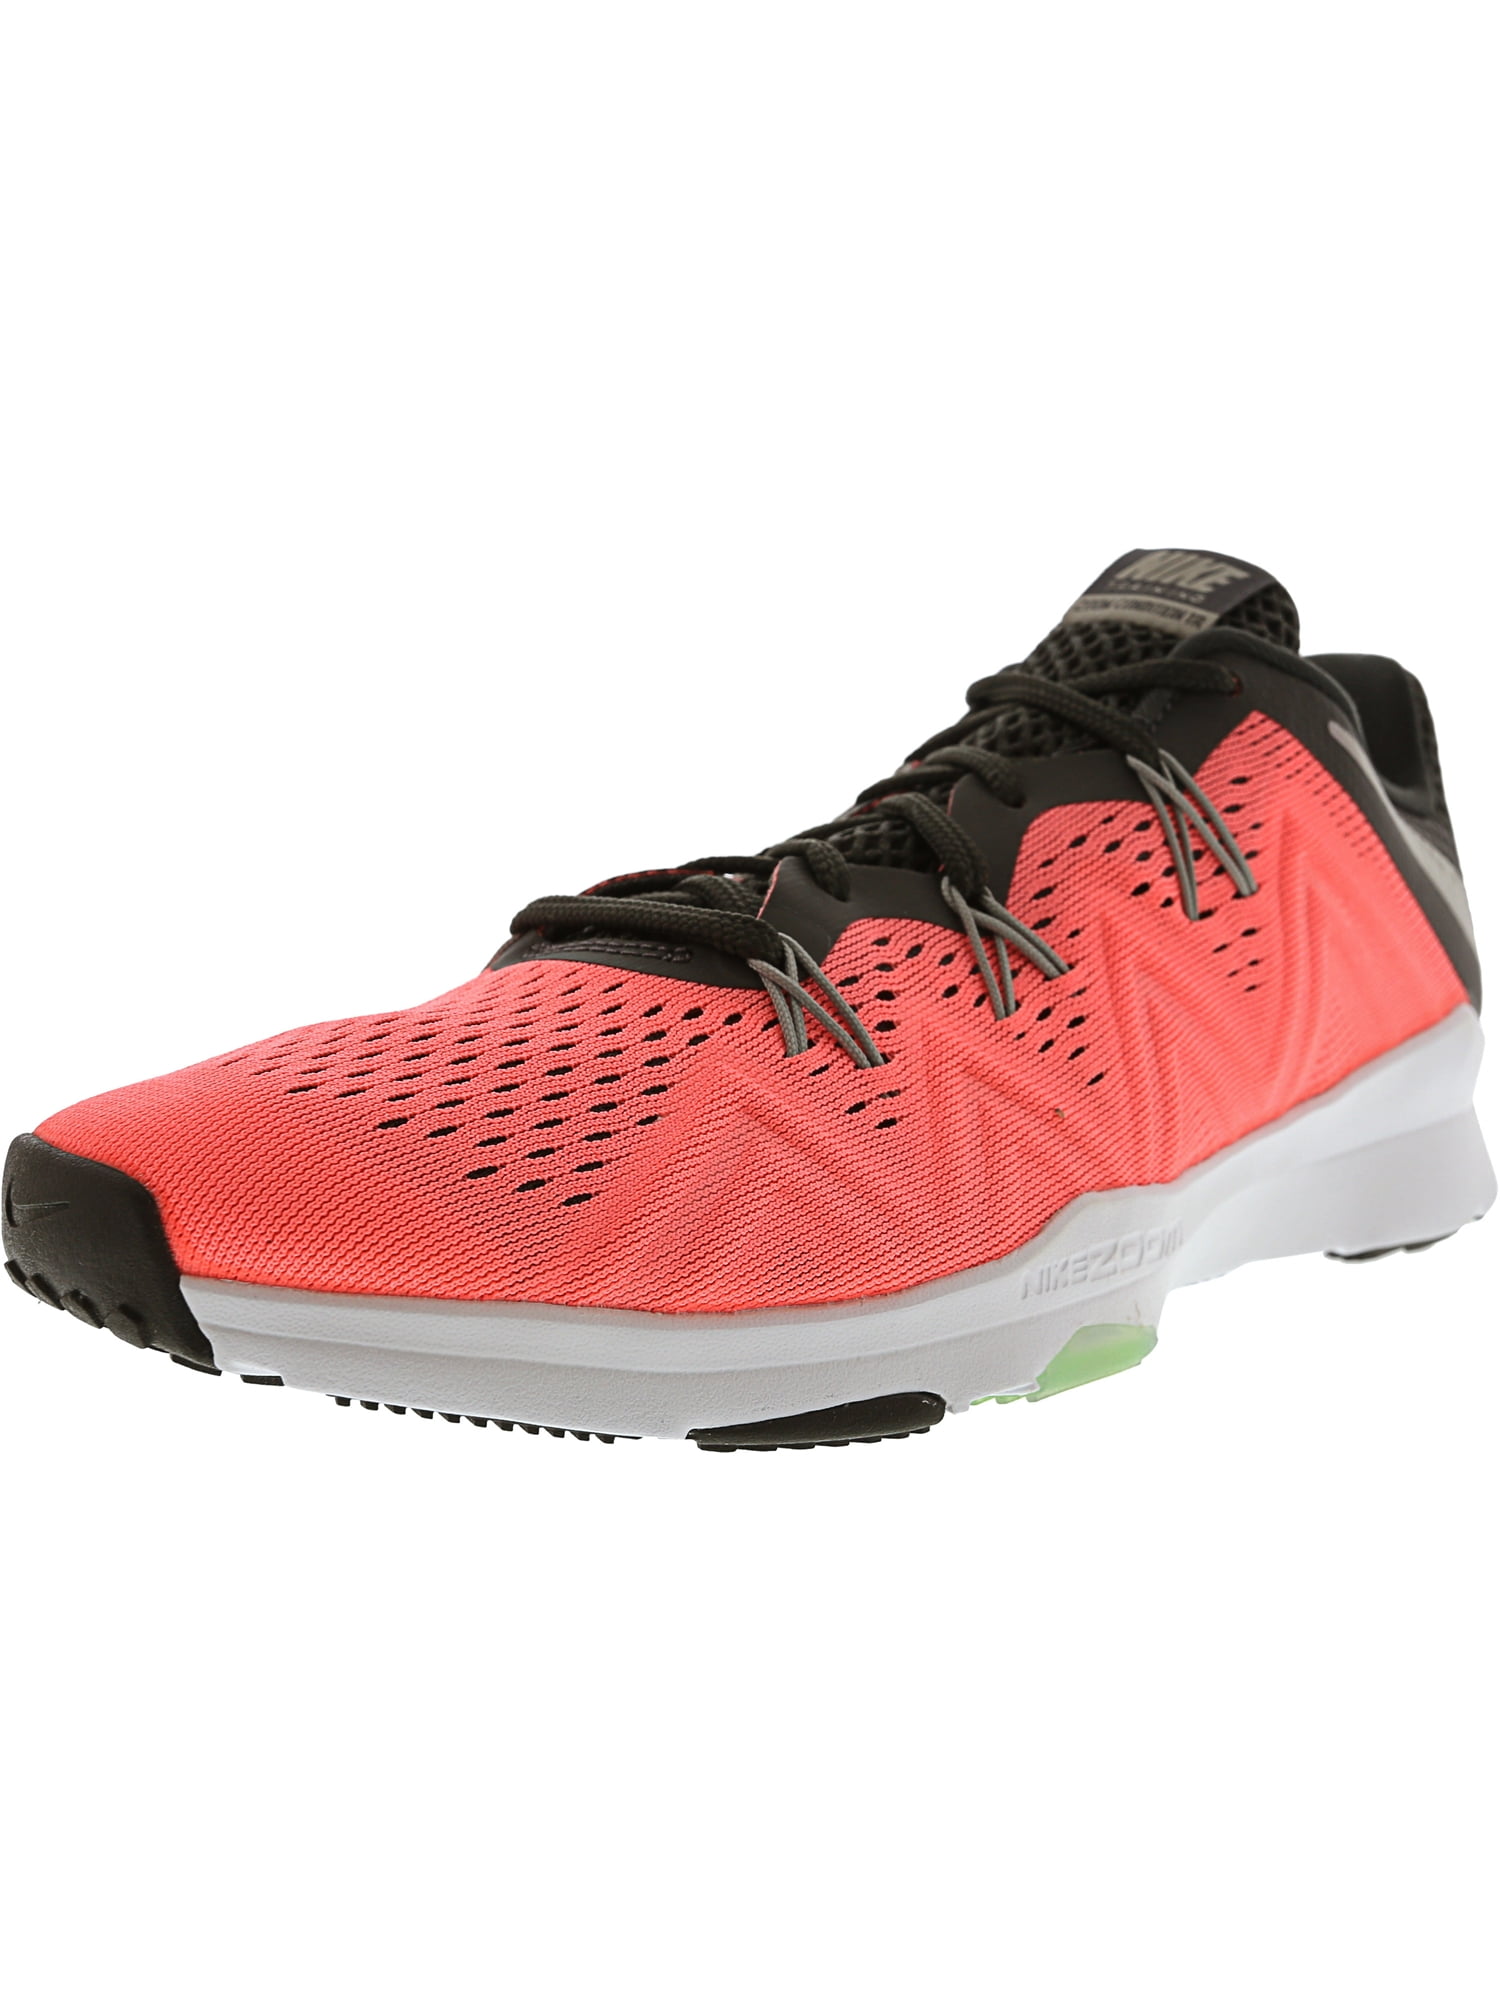 Nike Women's Zoom Condition Tr Glow / Matte Silver Ankle-High Fabric Training Shoes - 8.5M - Walmart.com